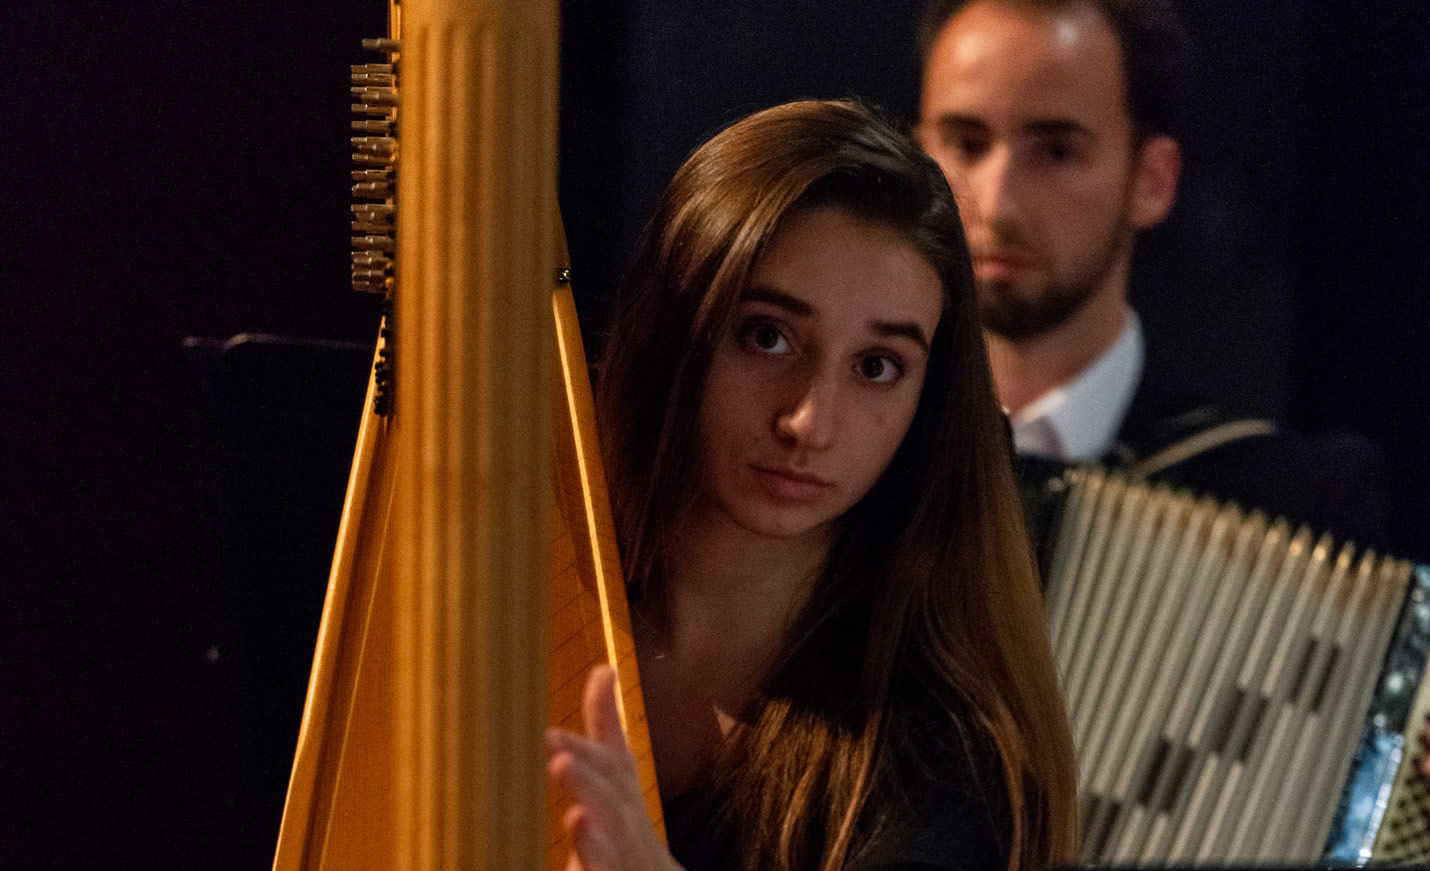 A close-up of a female harp player getting ready to perform.